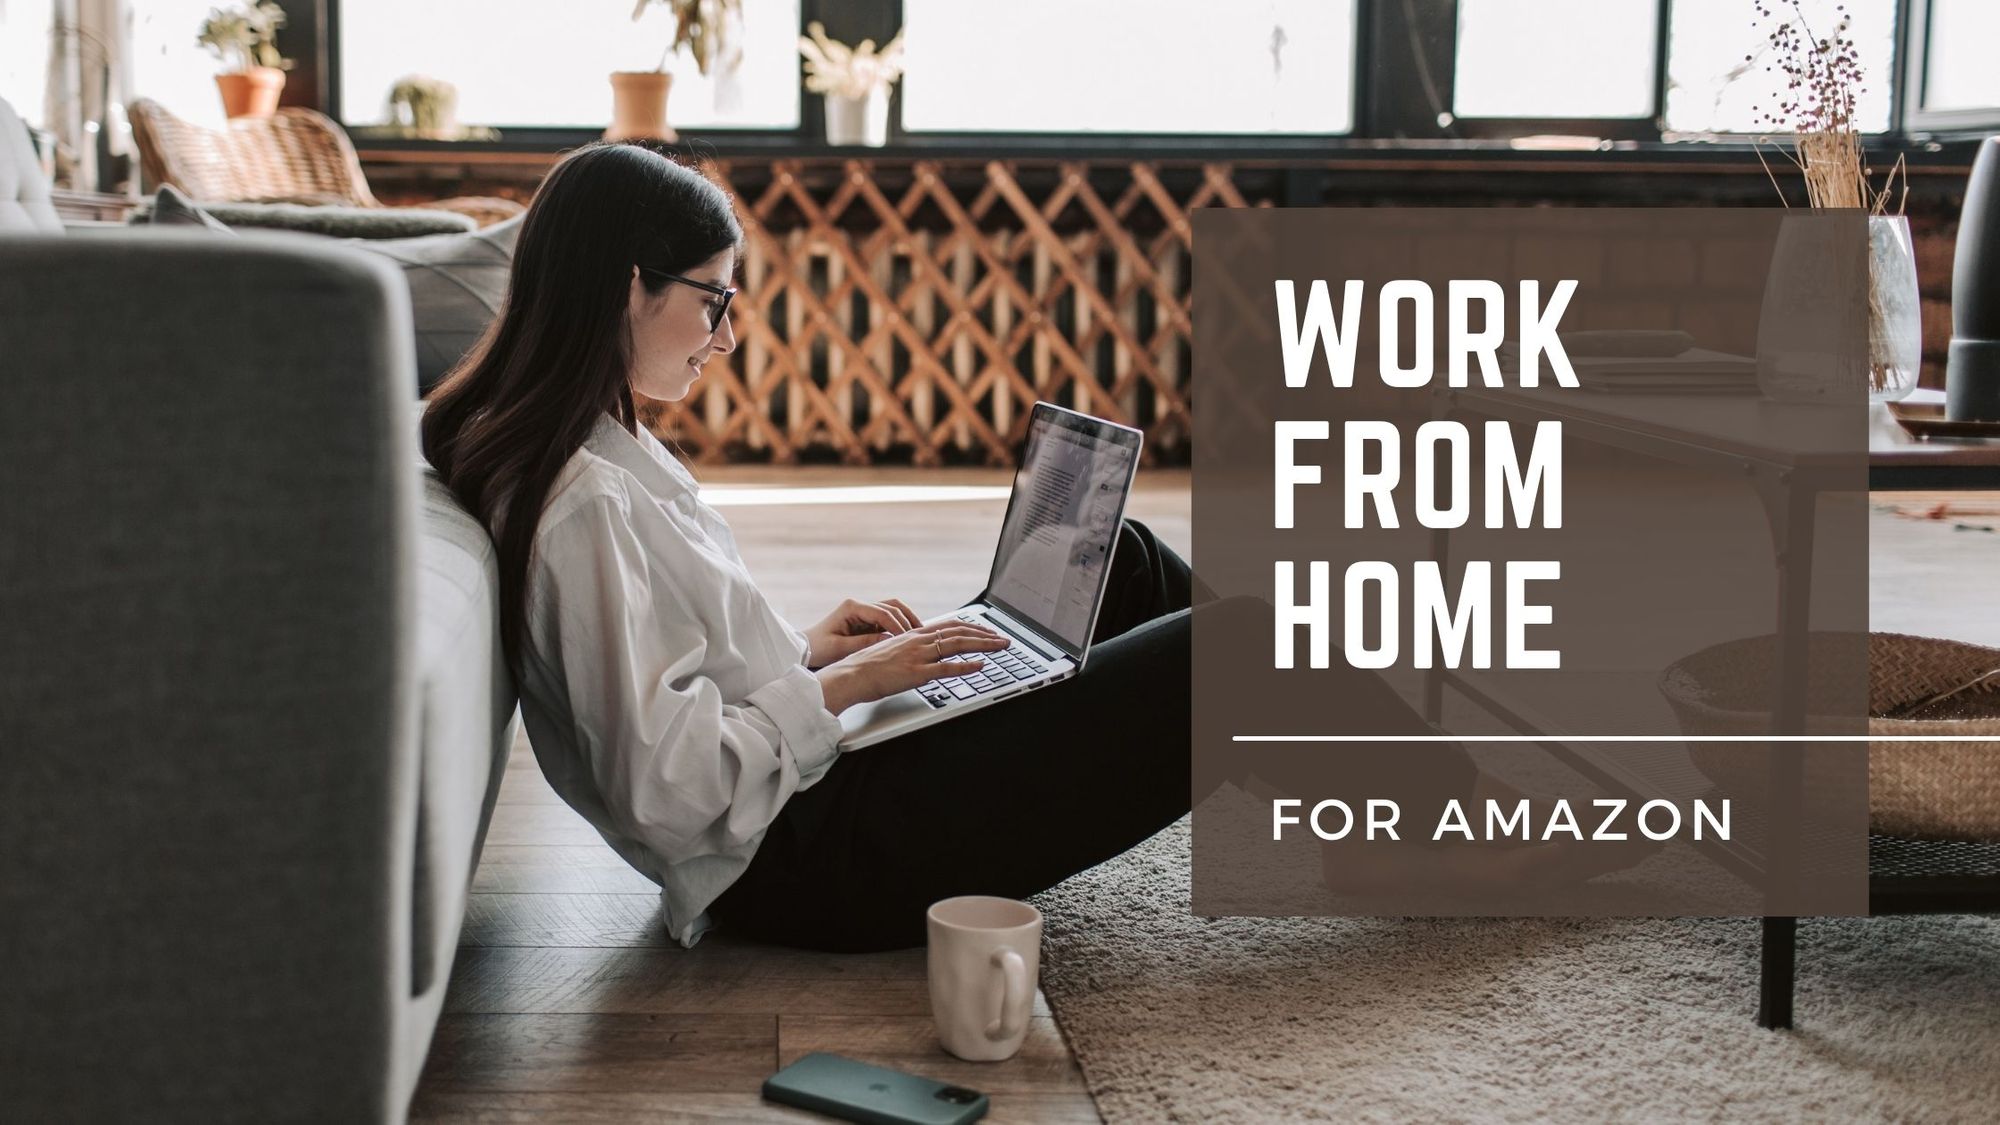 how to apply for amazon work from home